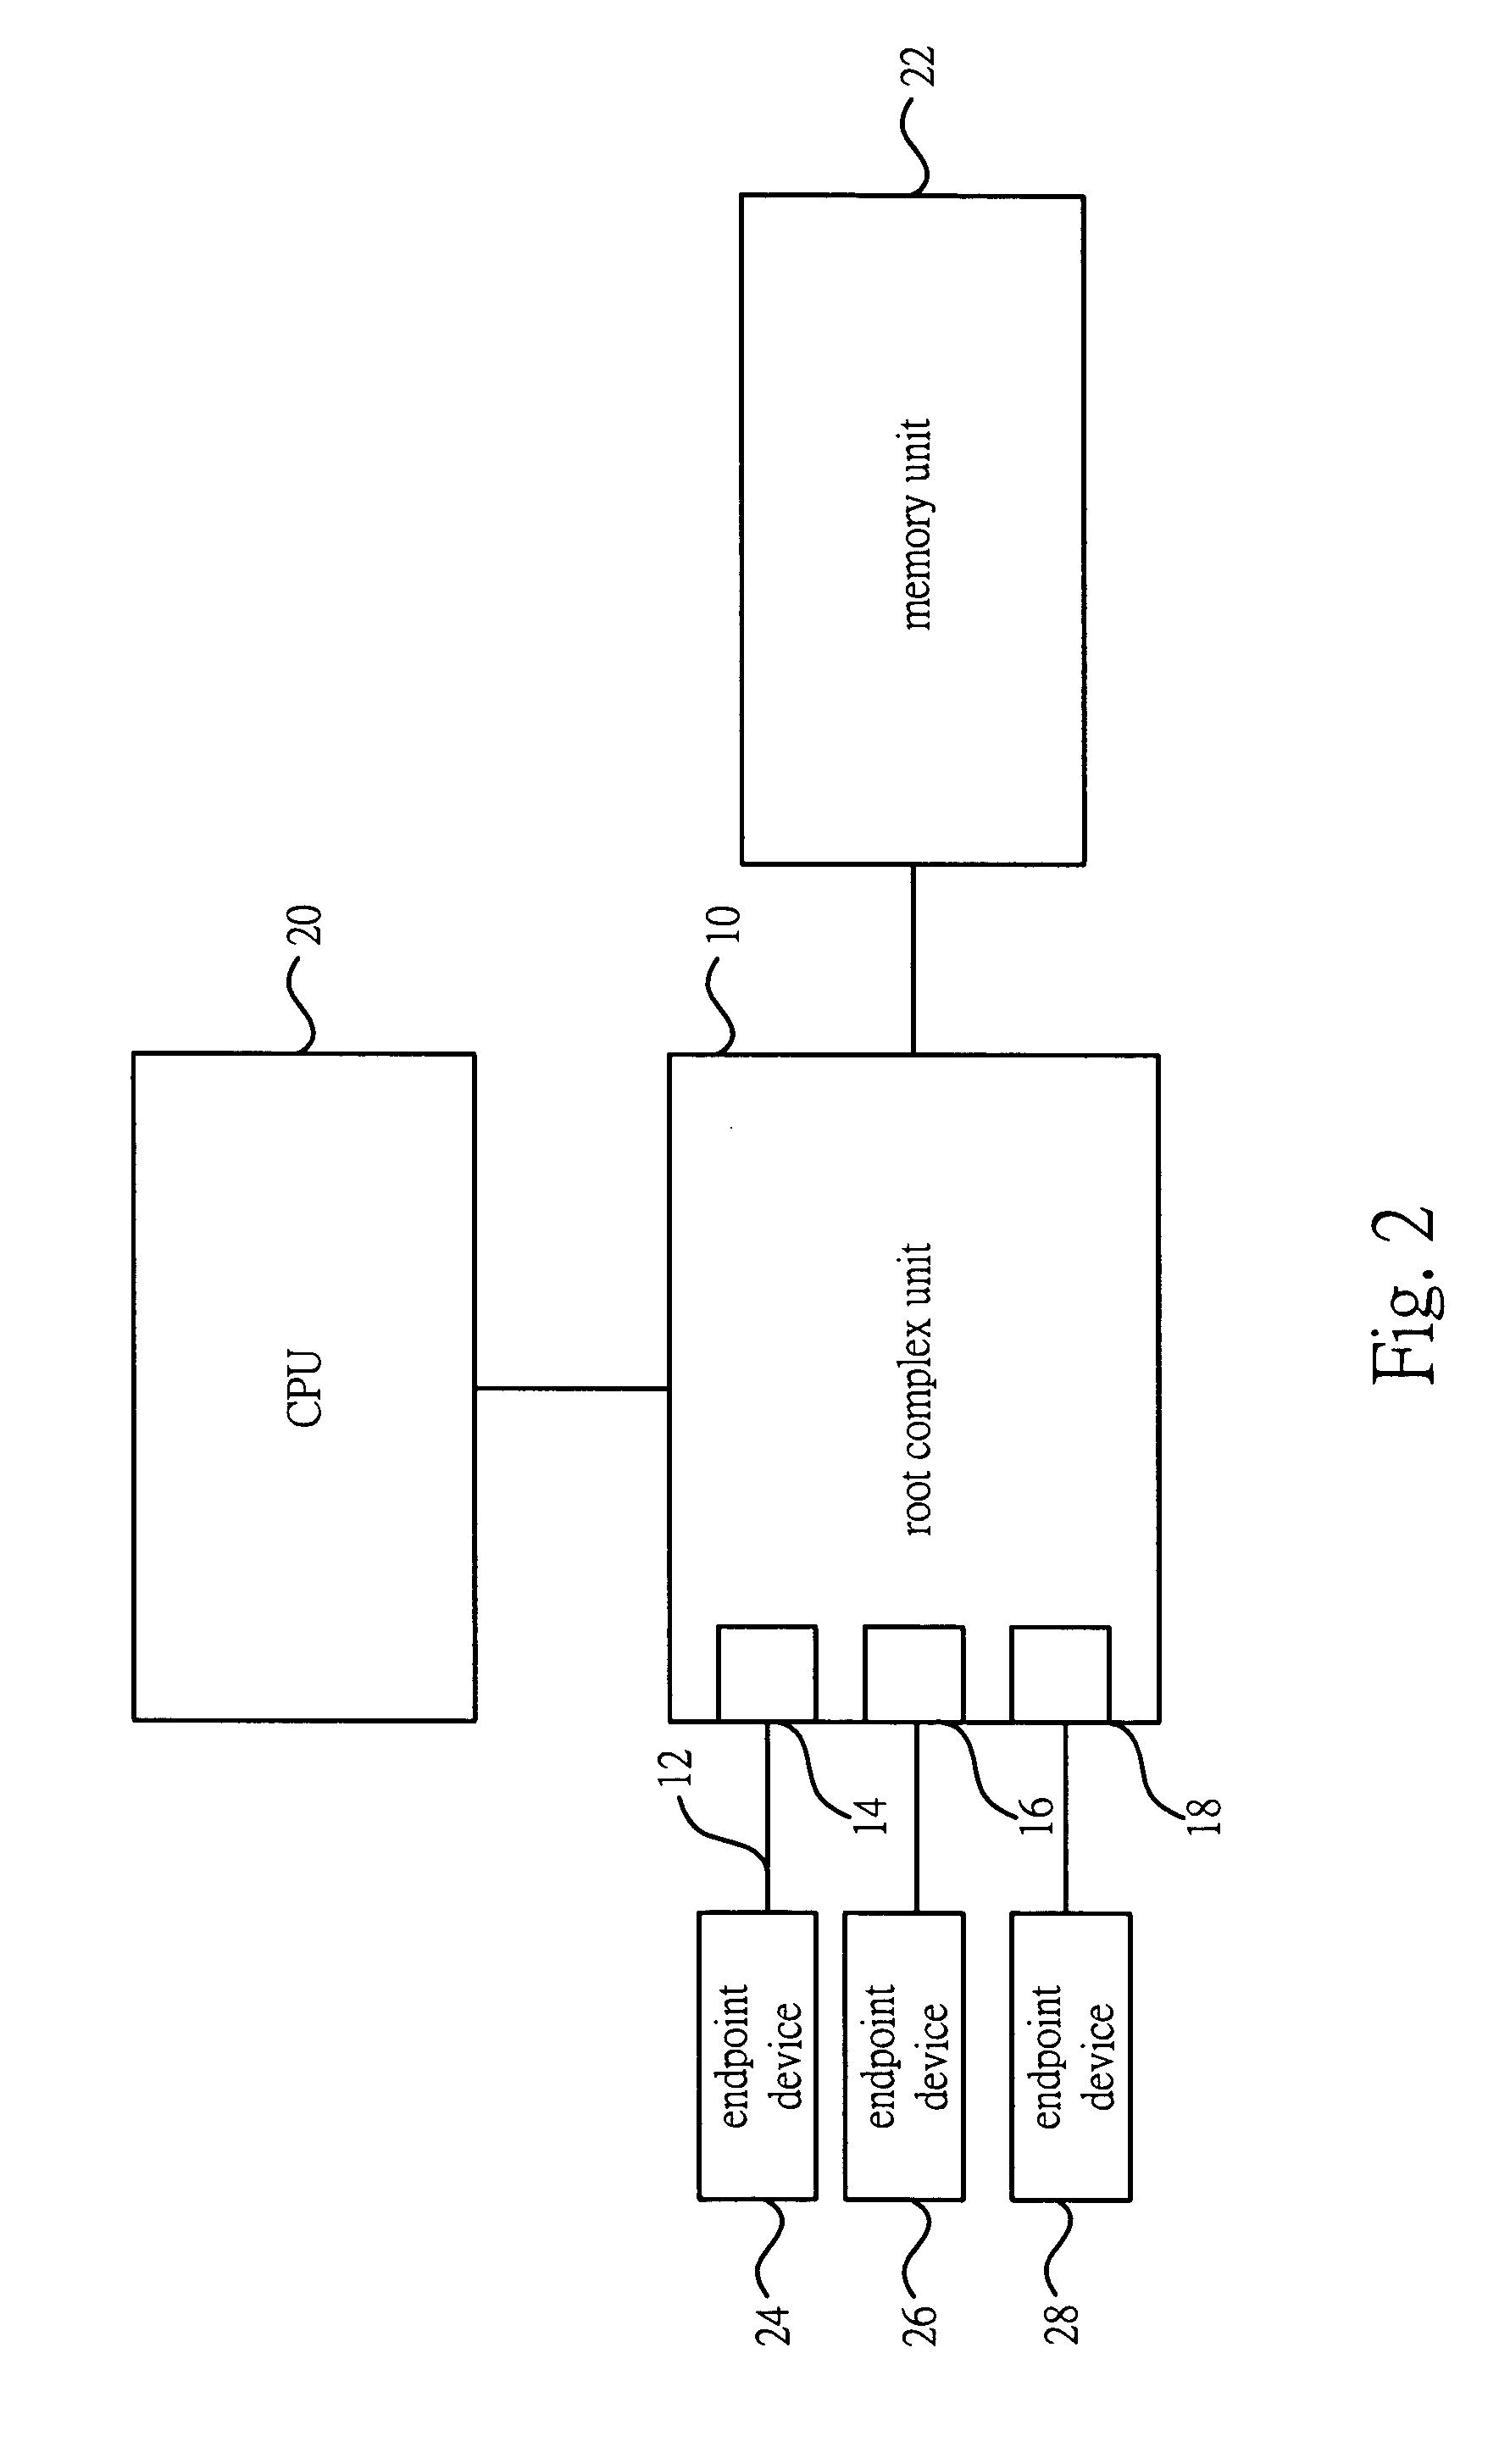 Method for dynamically adjusting the data transfer order of PCI express root ports